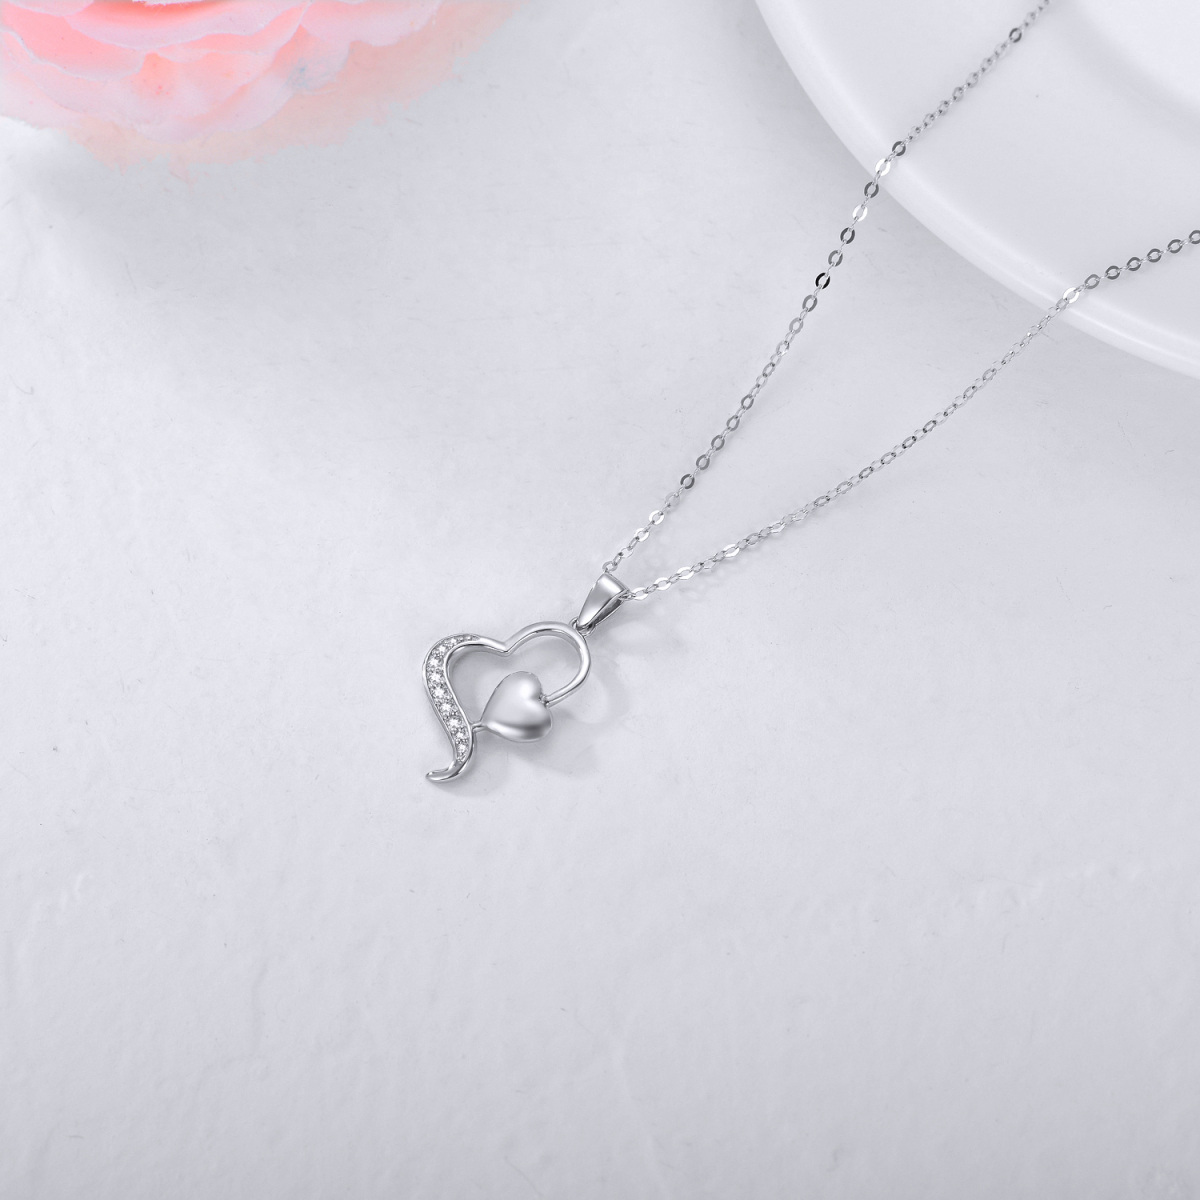 14K White Gold Diamond Heart With Heart Pendant Necklace-5